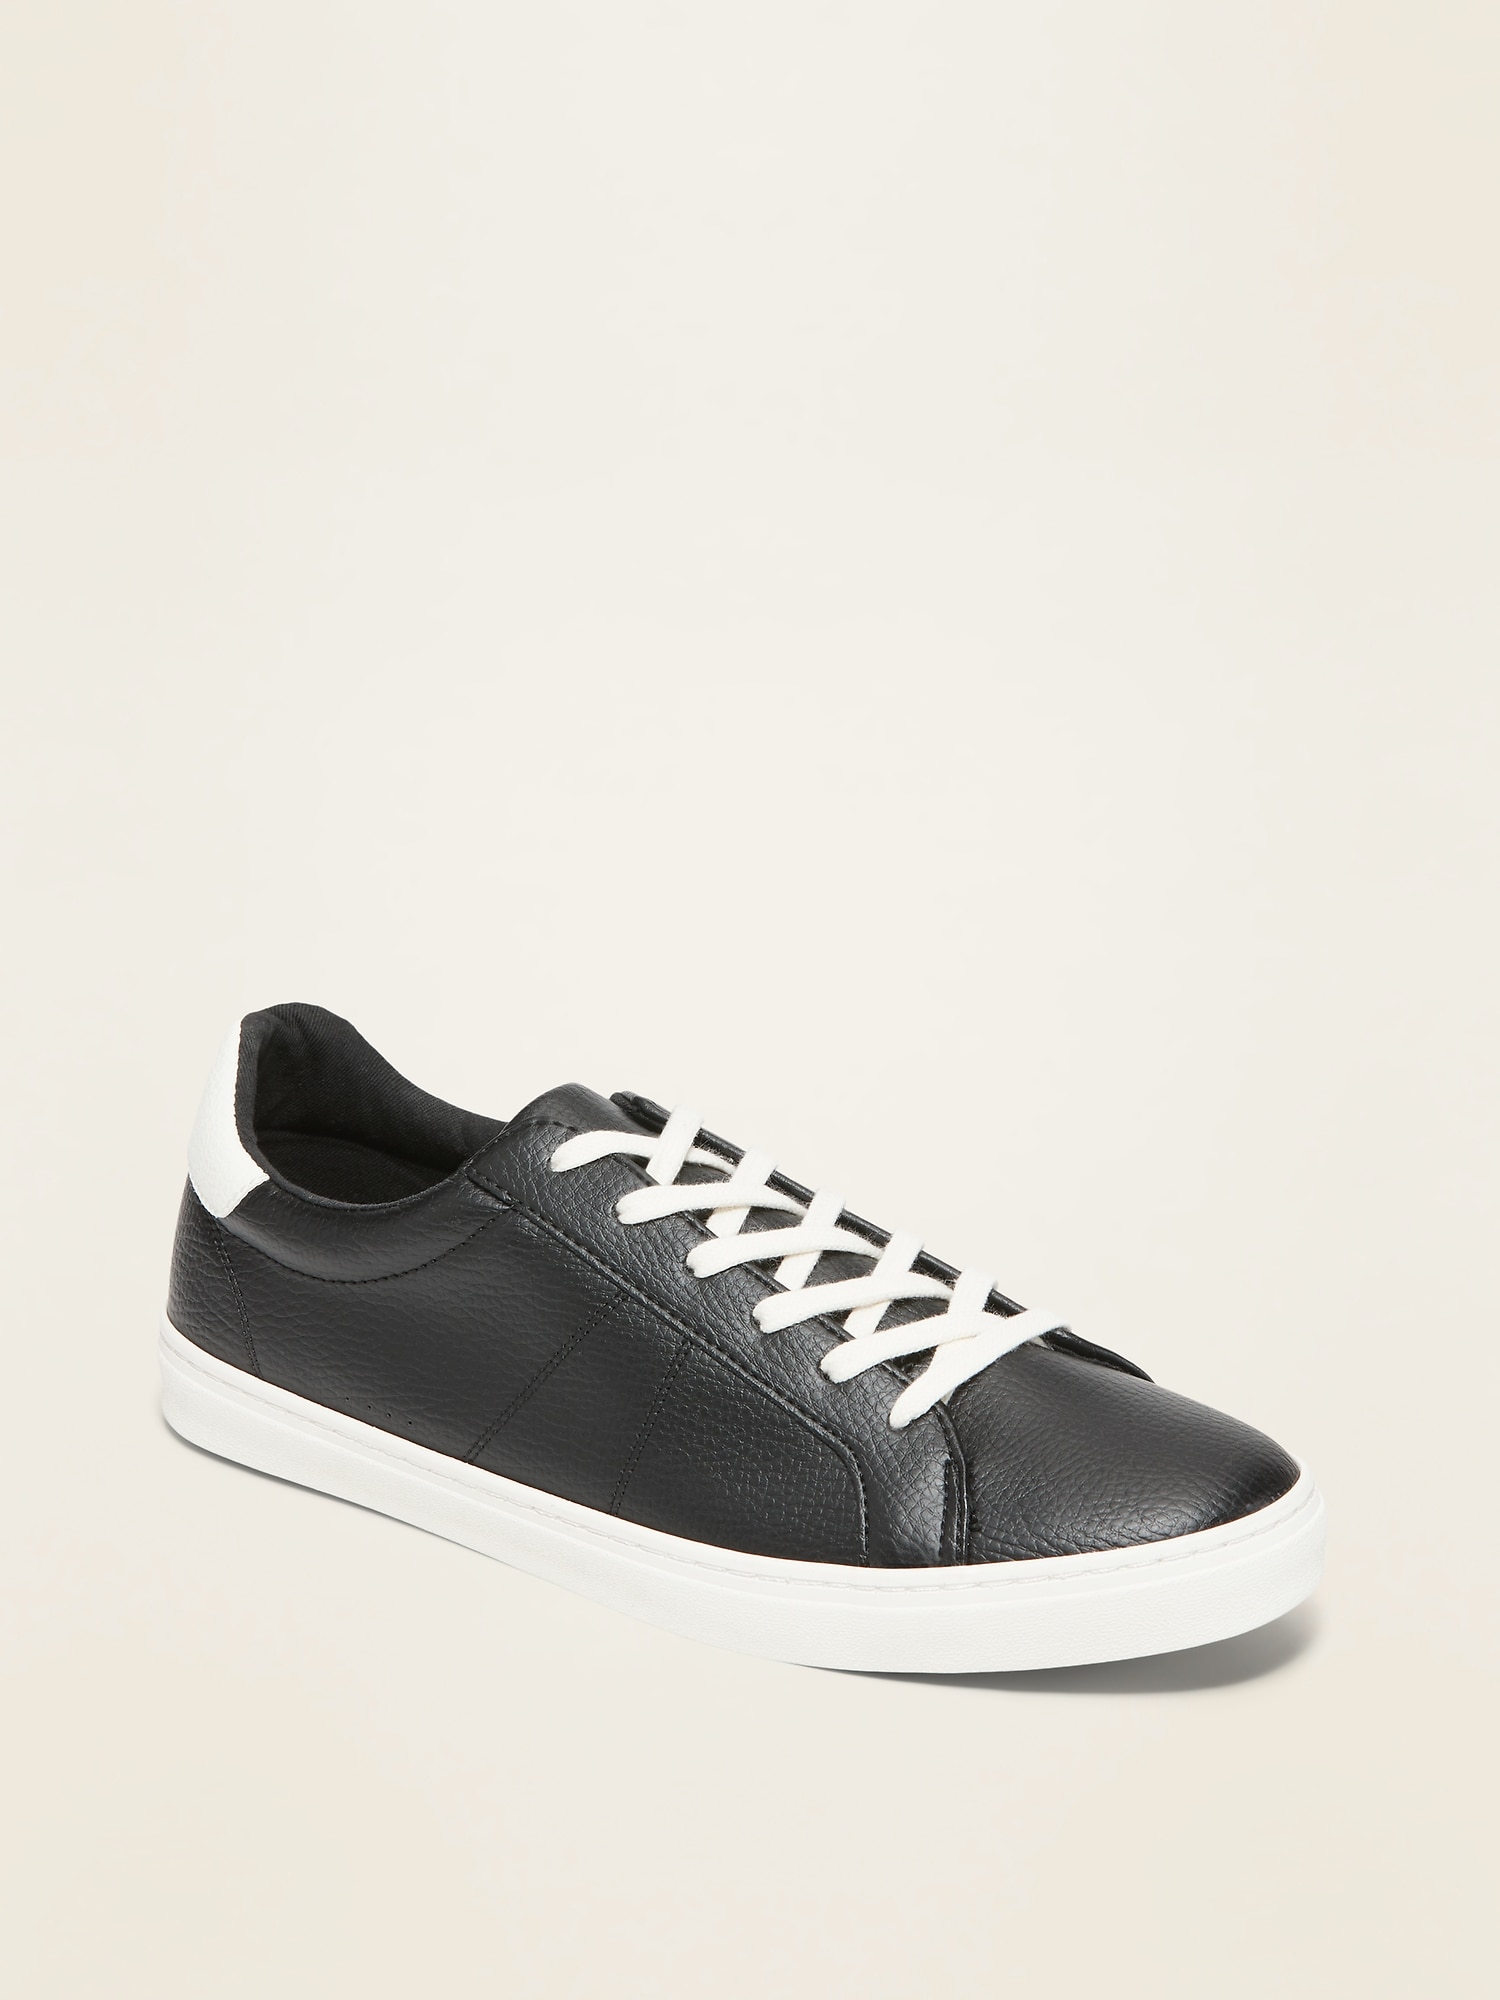 black leather tennis shoes womens